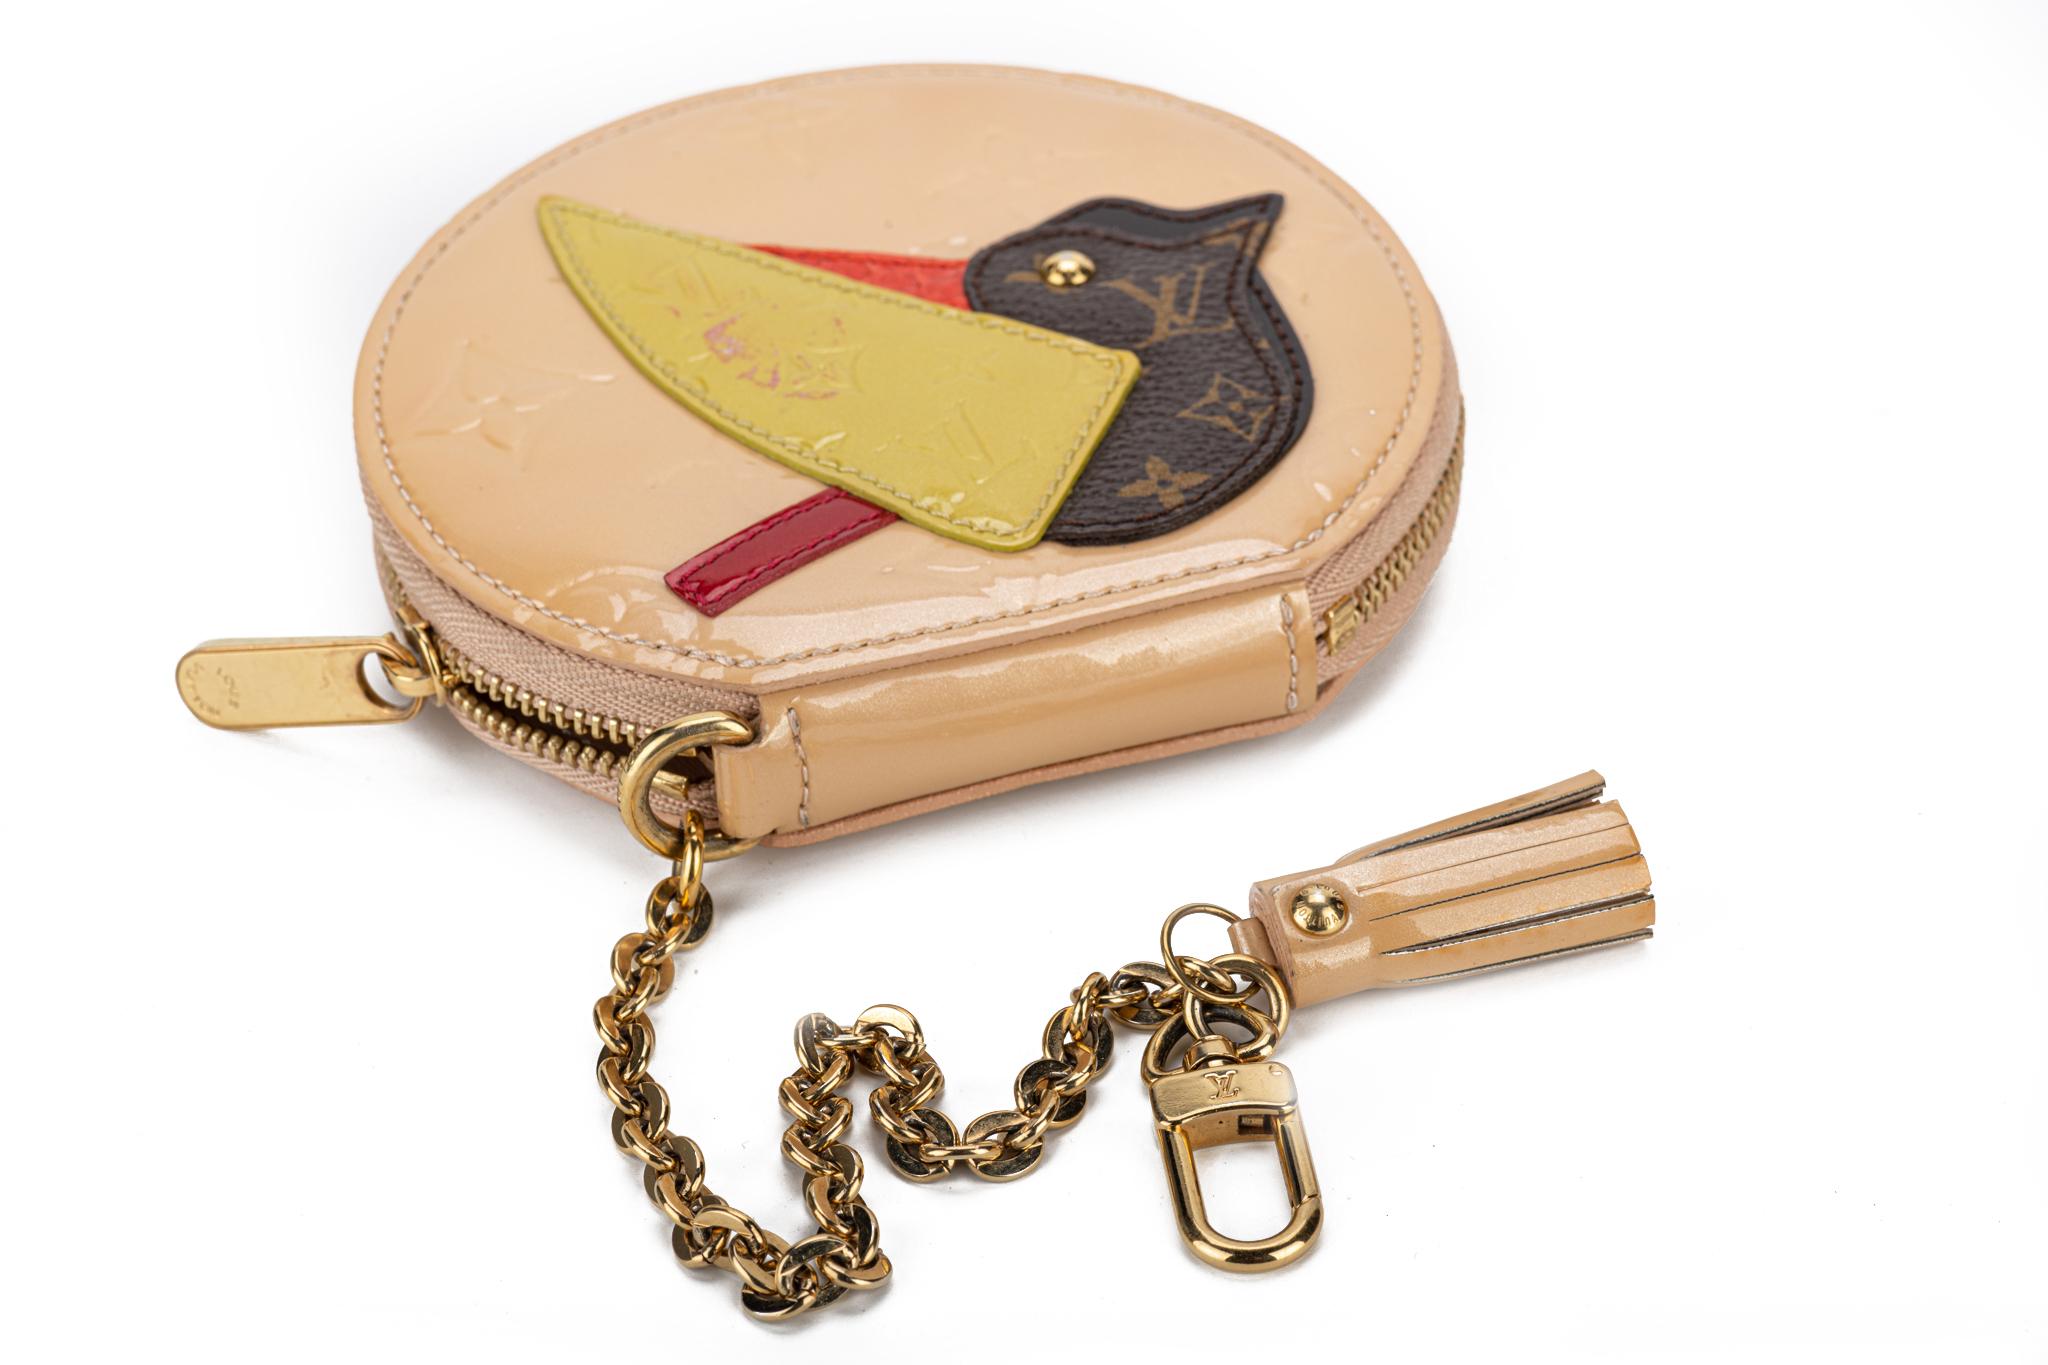 Louis Vuitton limited edition bird round coin case in pink patent leather . Red lizard detail and monogram canvas. Color transfer on patent leather and interior dirt. Comes with original box.
